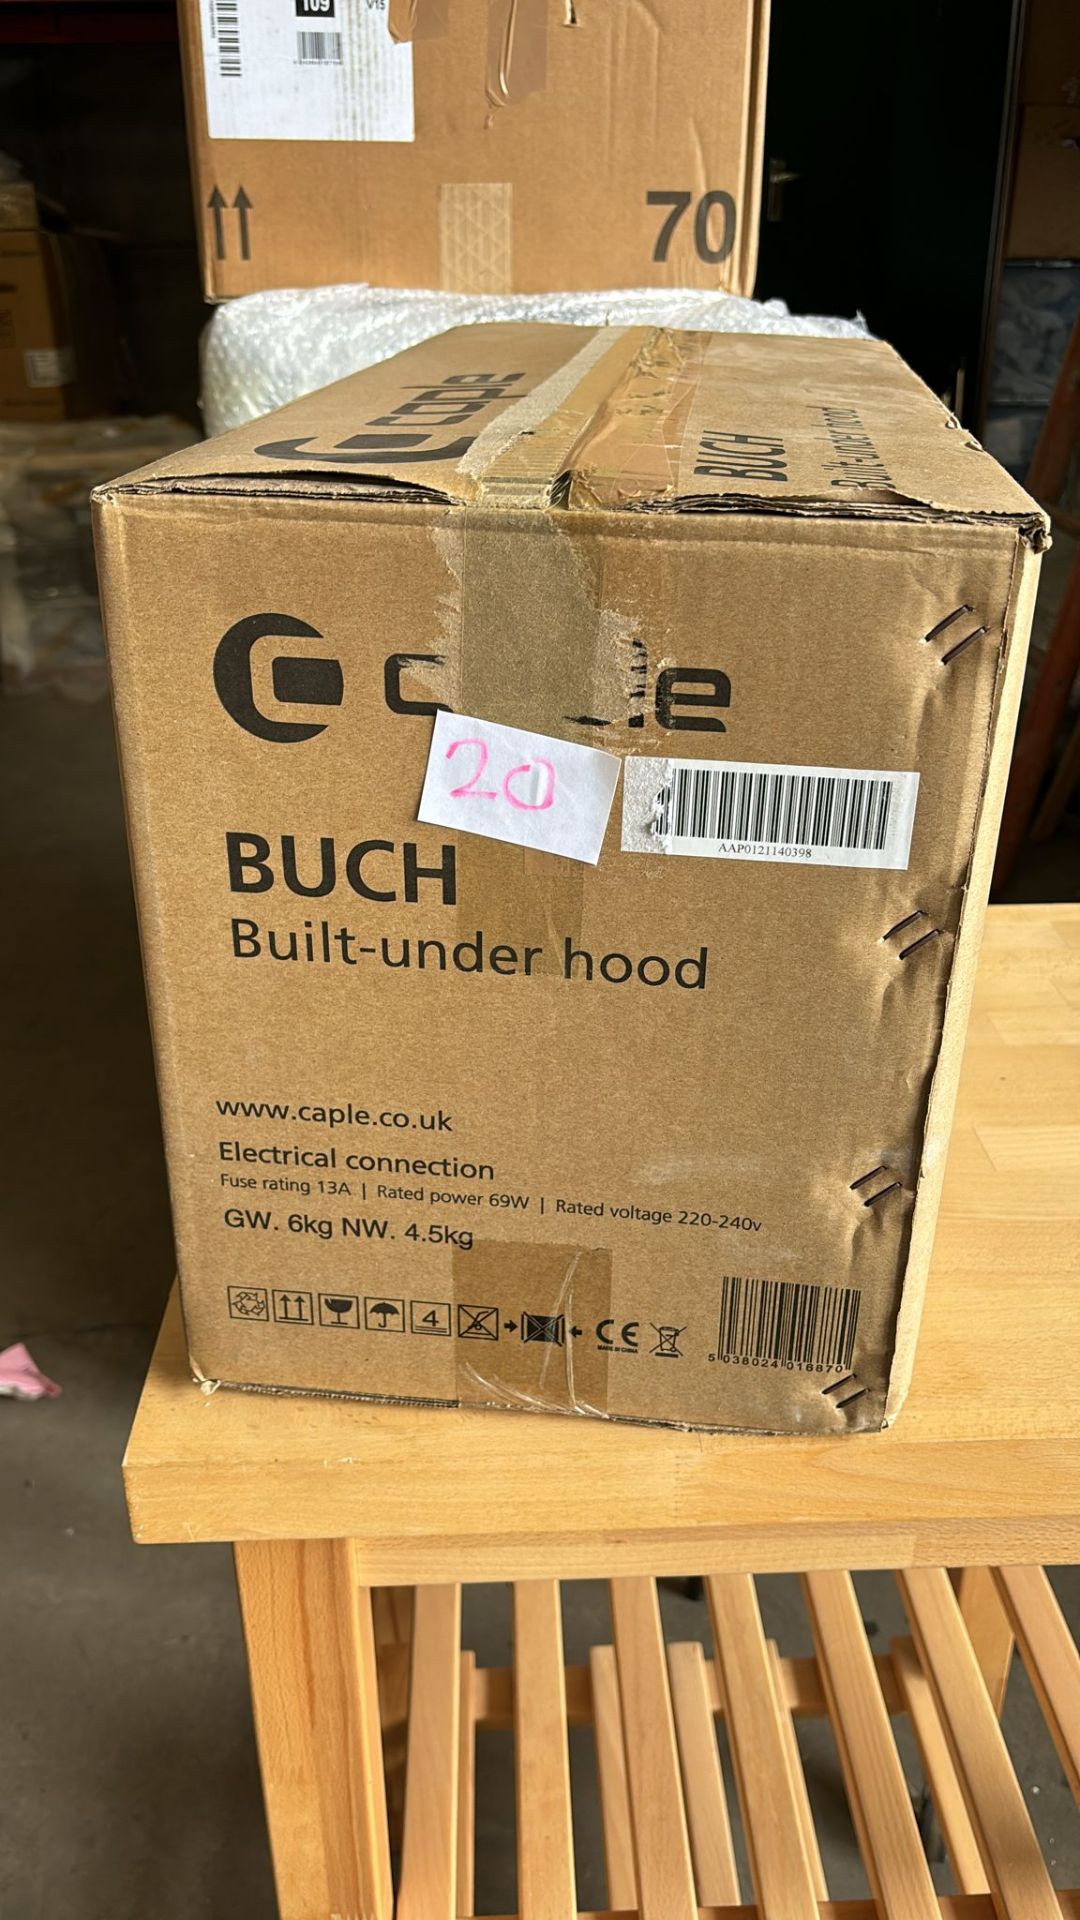 Brand New Boxed Caple BUCH Integrated Cooker Hood RRP £199.99 - Image 2 of 2